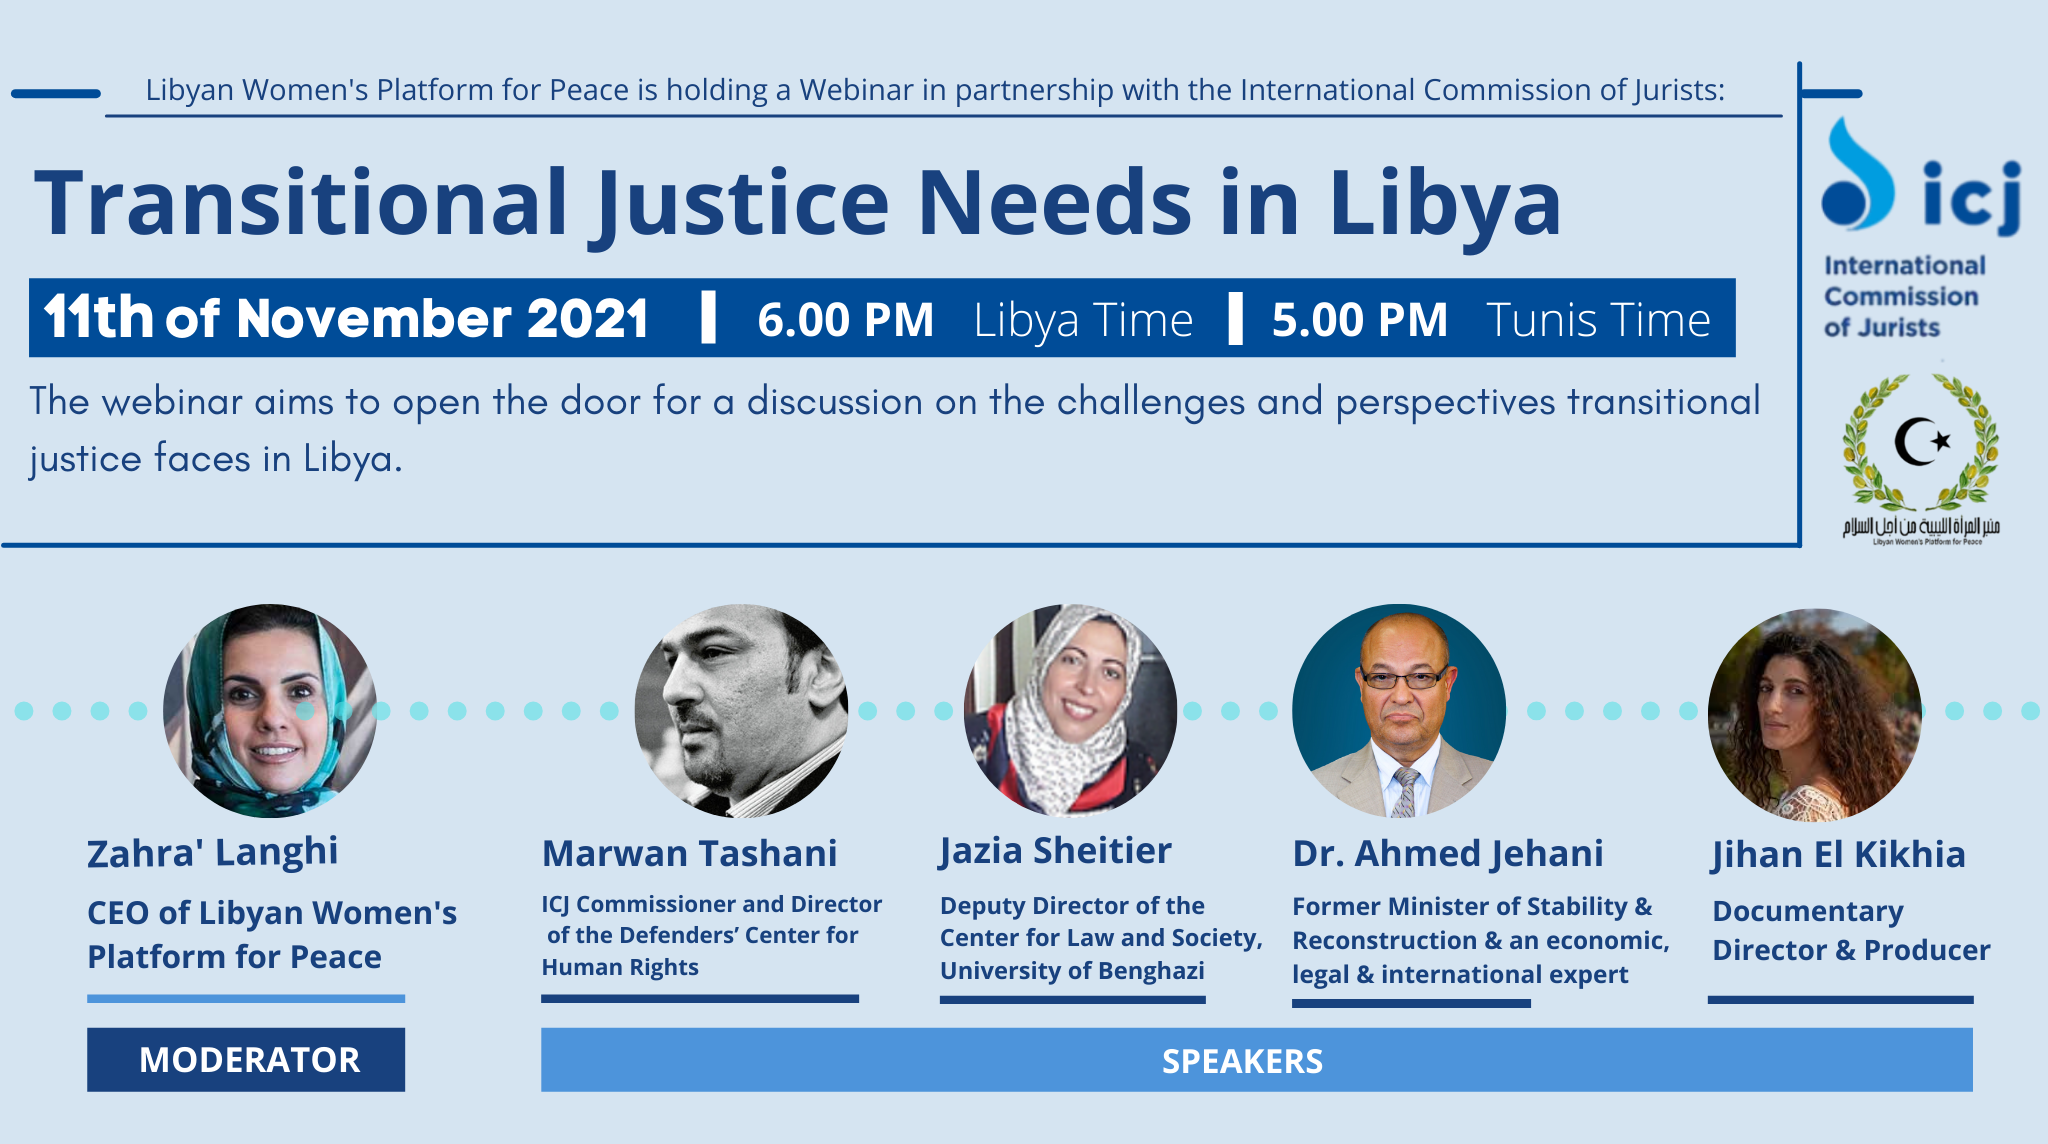 'Transitional Justice Needs in Libya': LWPP & the ICJ hold a Webinar coinciding with the 1st Anniversary of Hanan Al-Barassi's Assassination